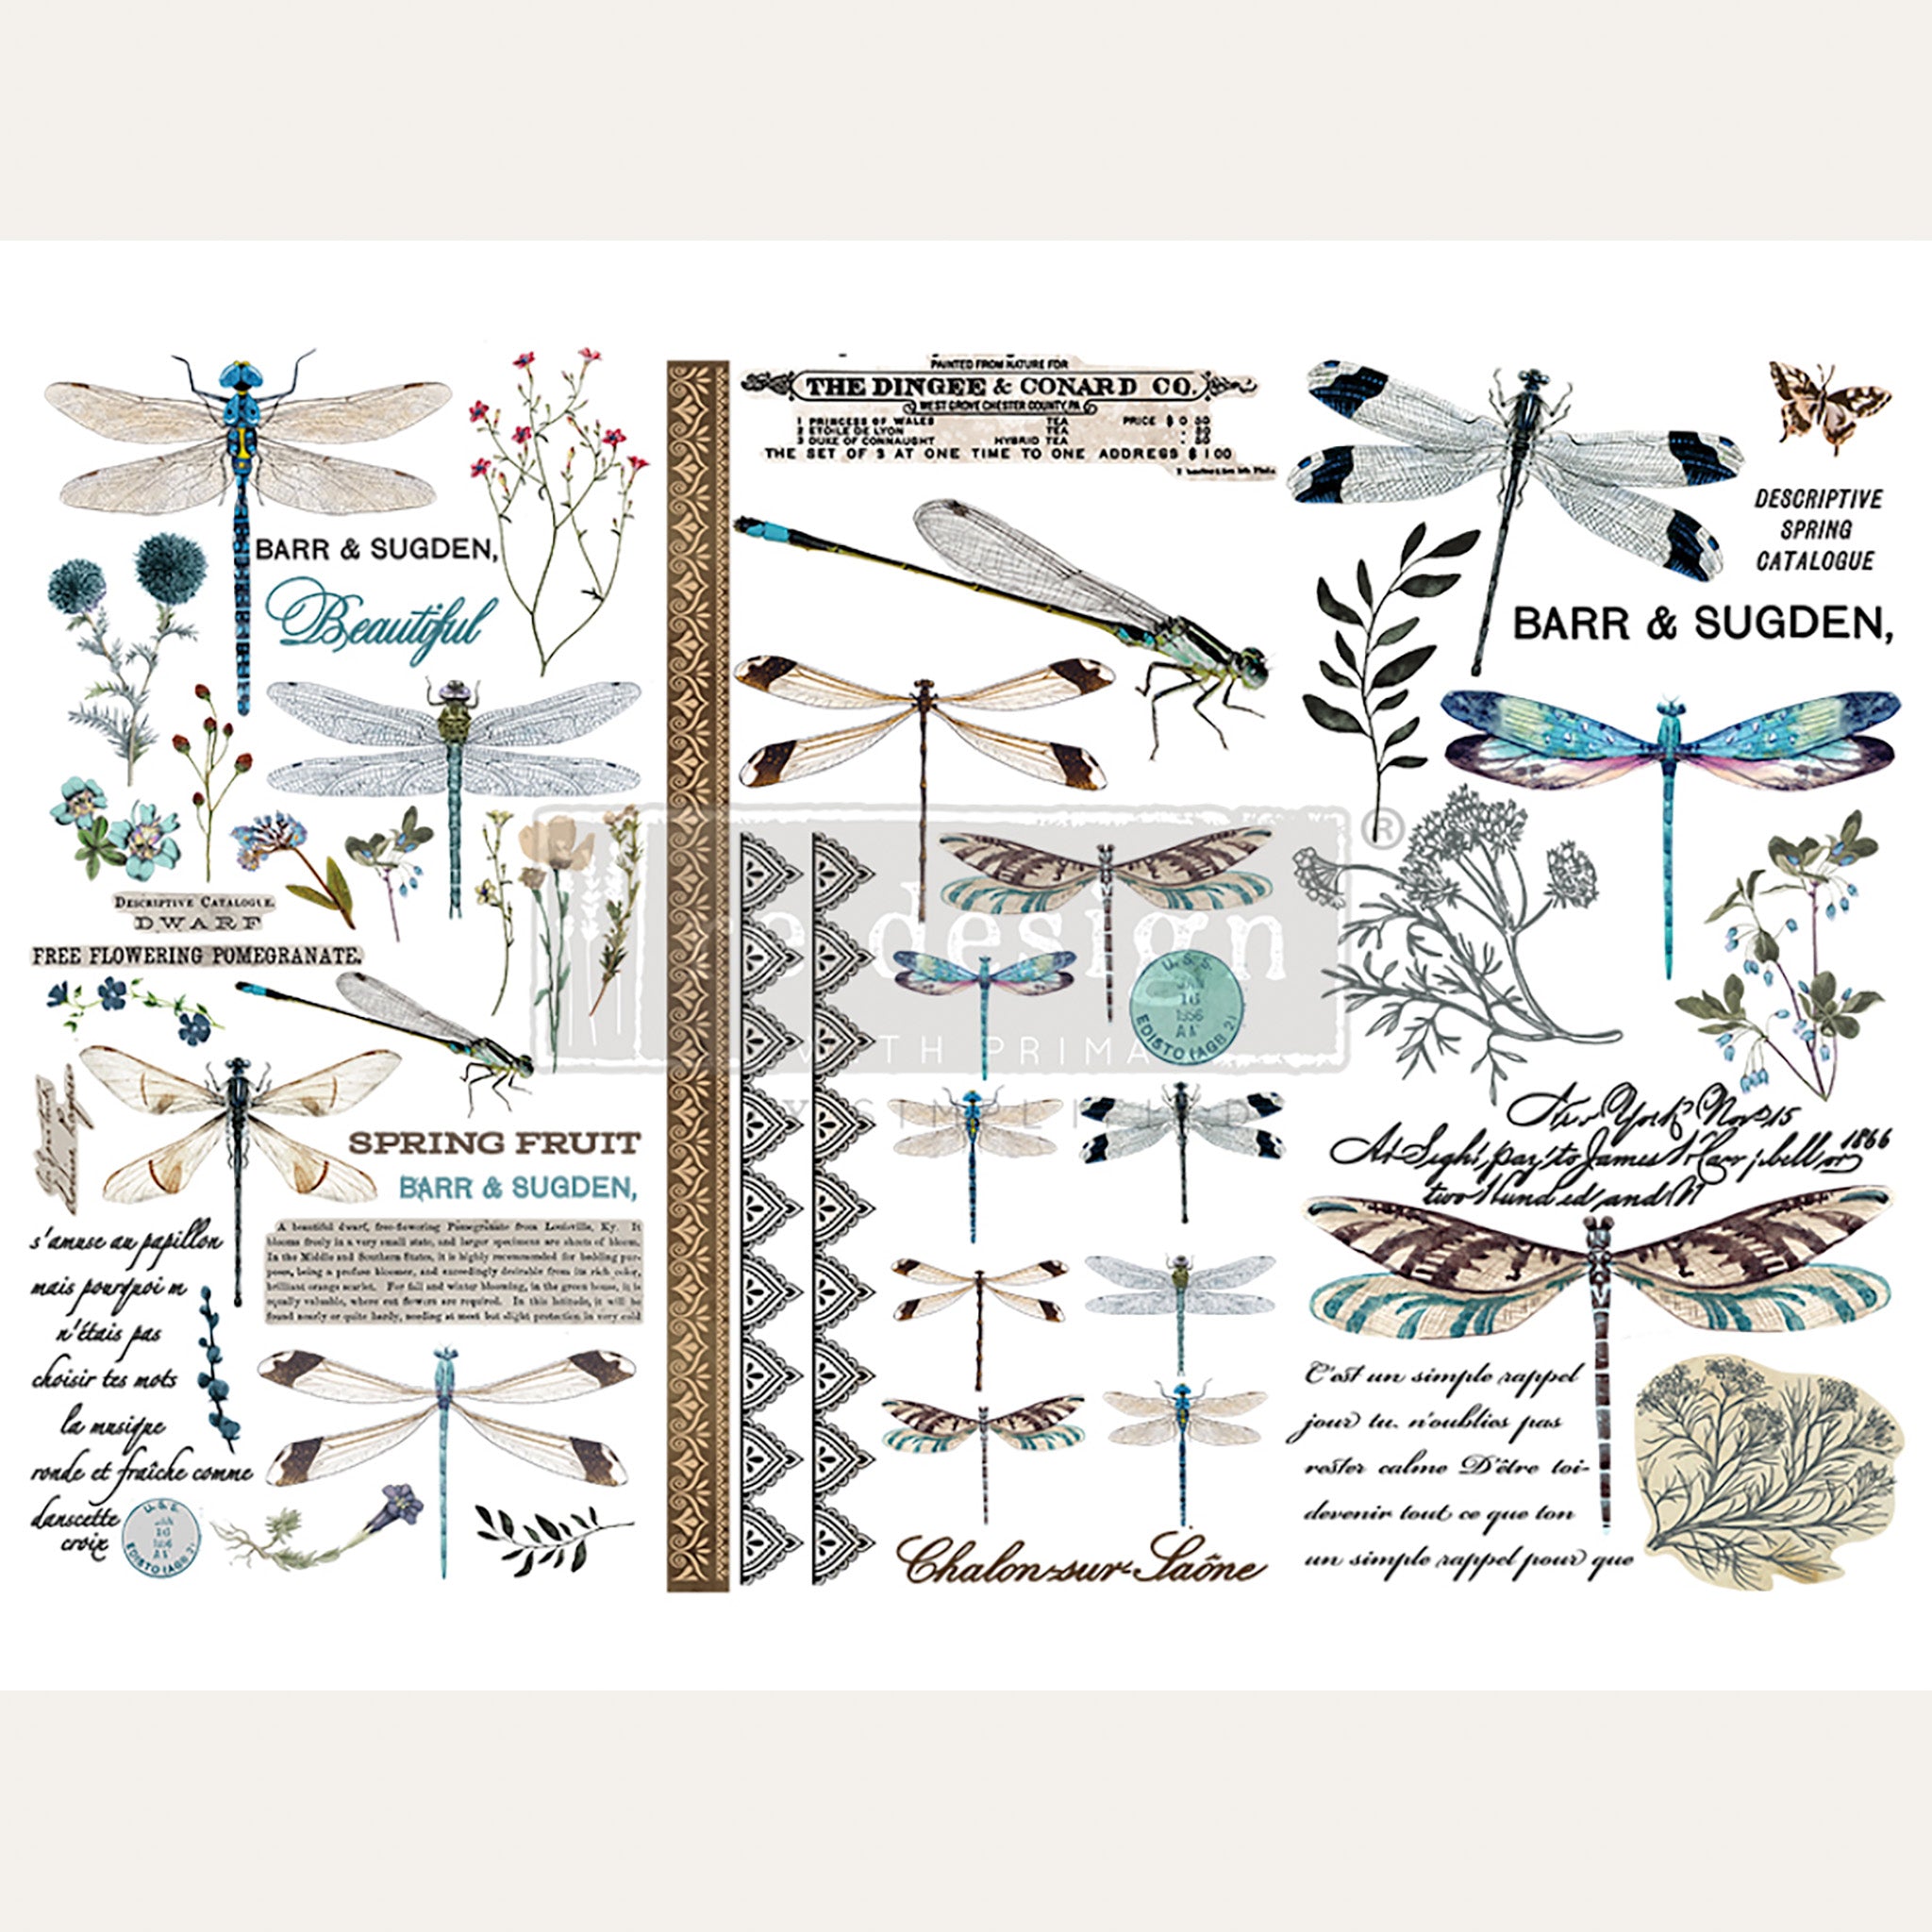 Small rub-on transfer design with lots of dragonflies, decorative borders, wildflowers, and some script writing. Light beige borders are on the top and bottom.